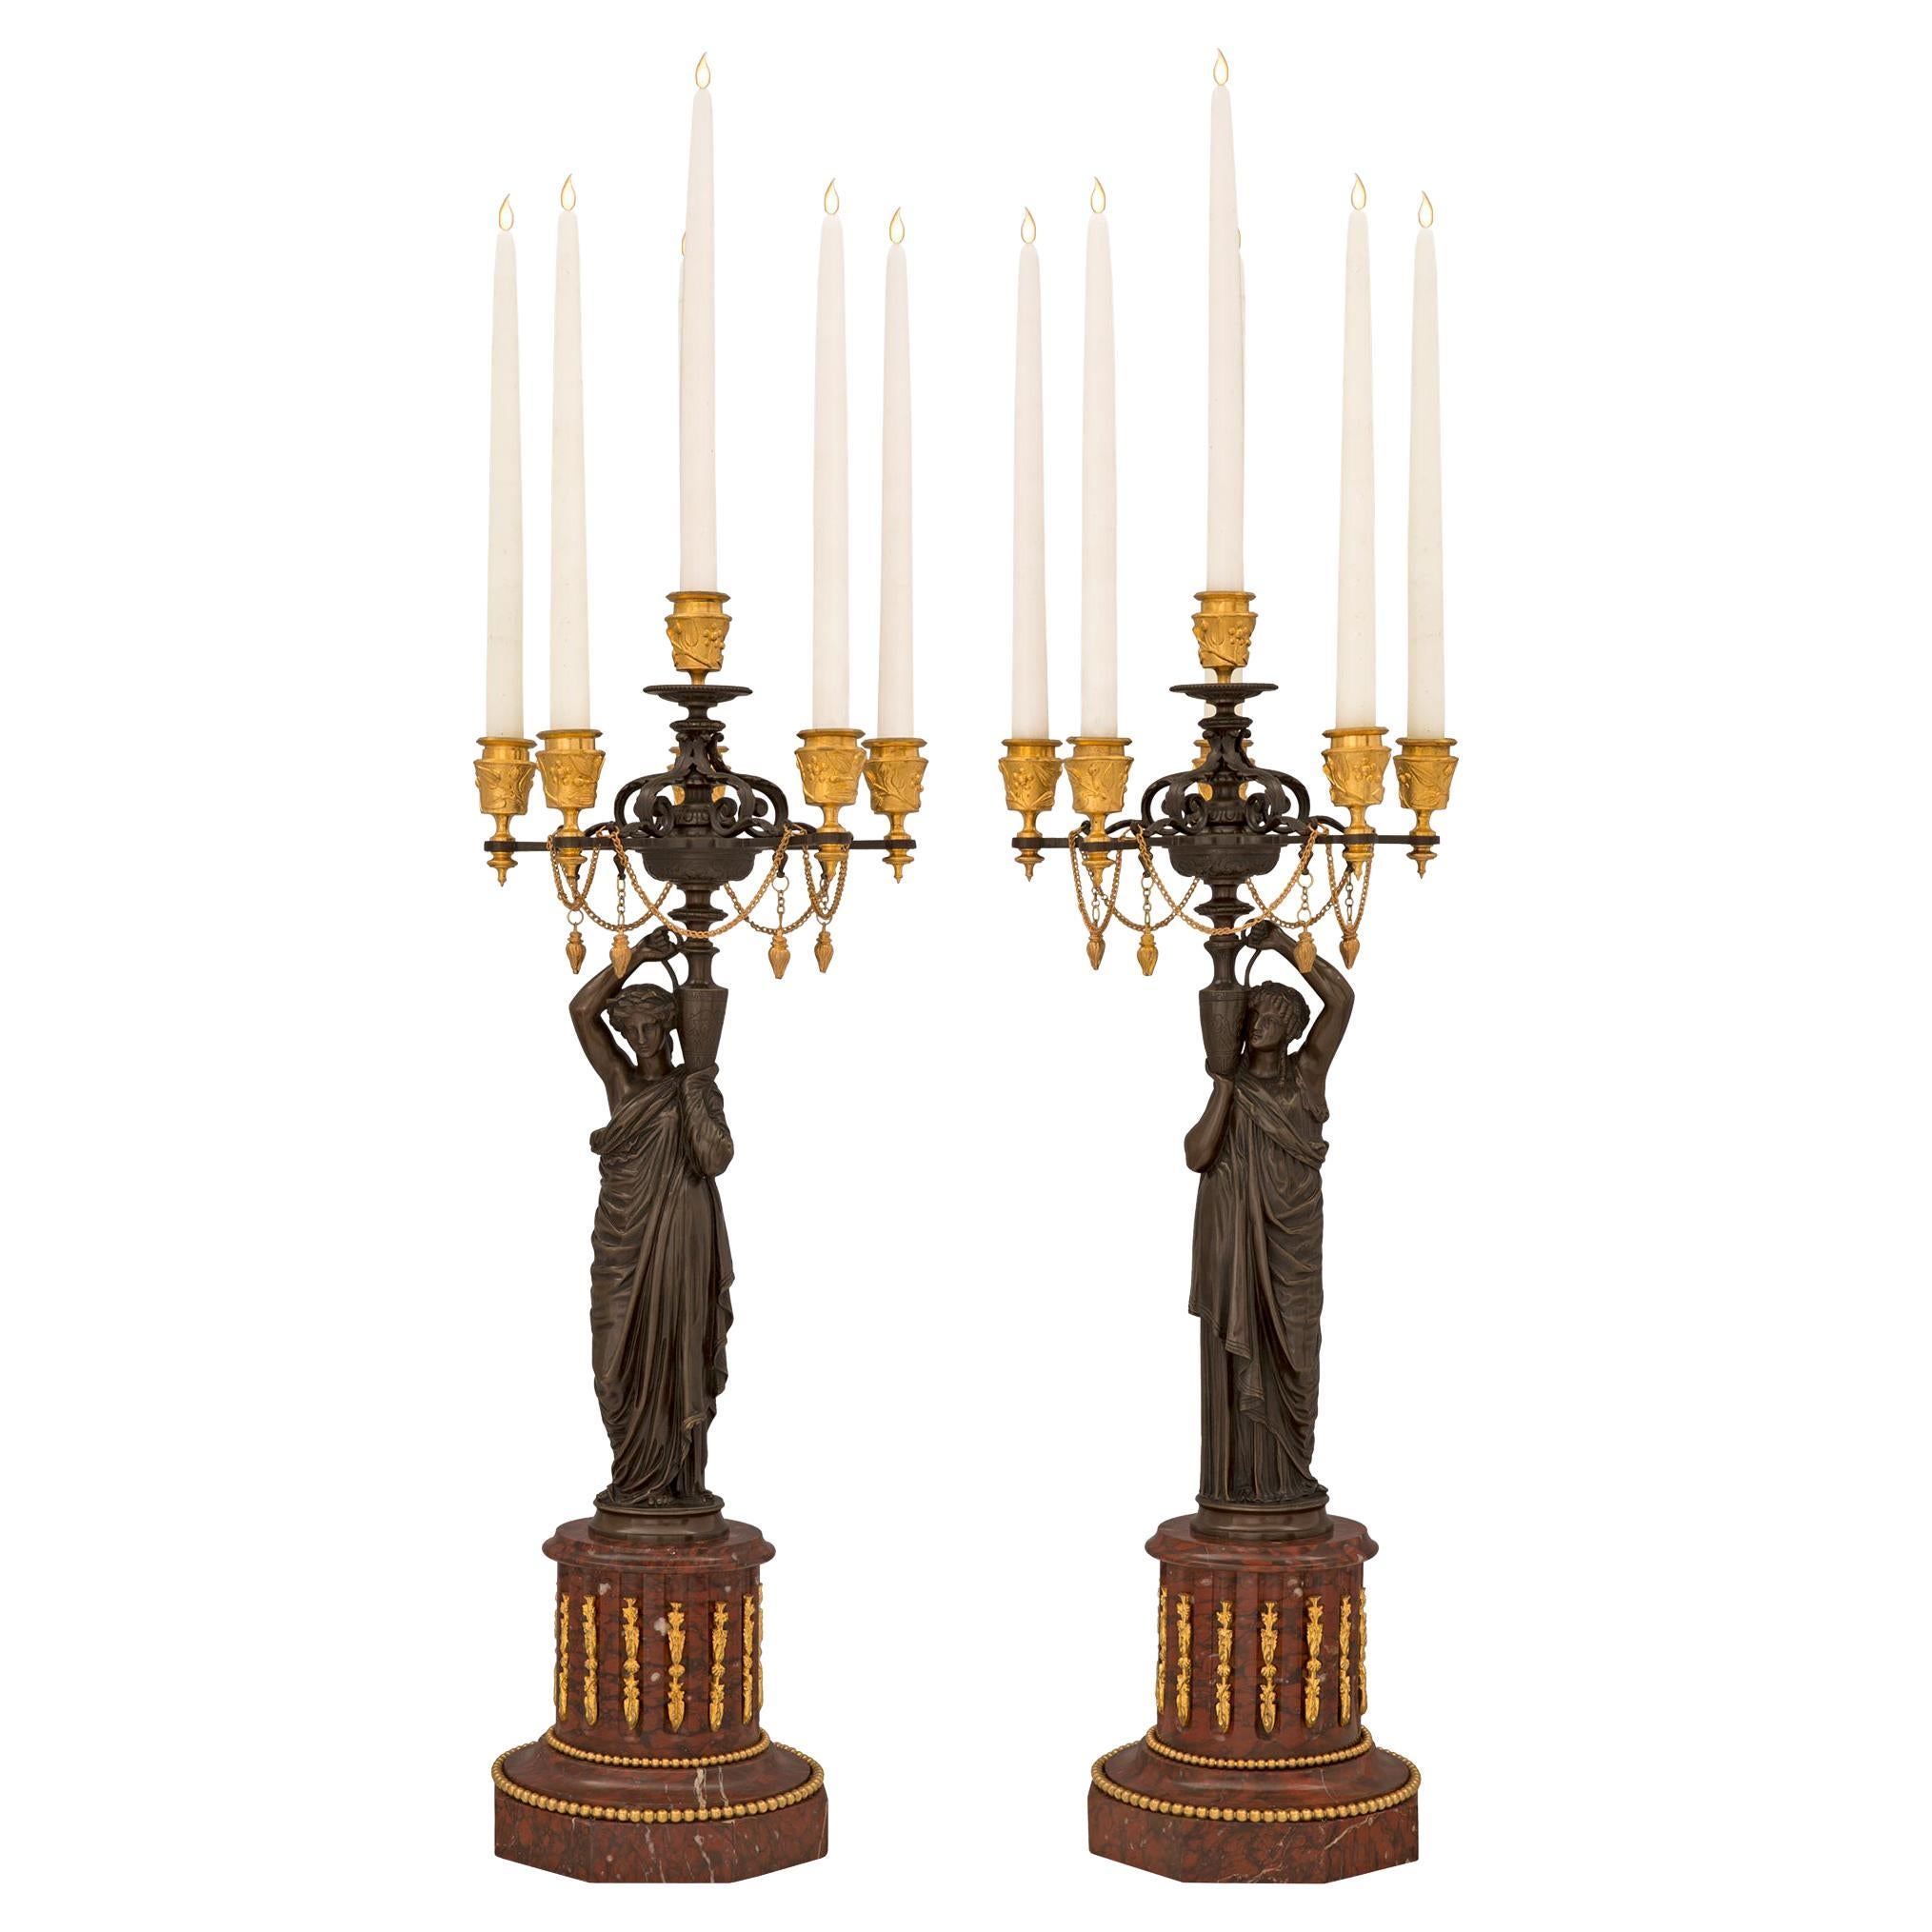 Pair of French 19th Century Louis XVI Style Marble and Bronze Candelabras